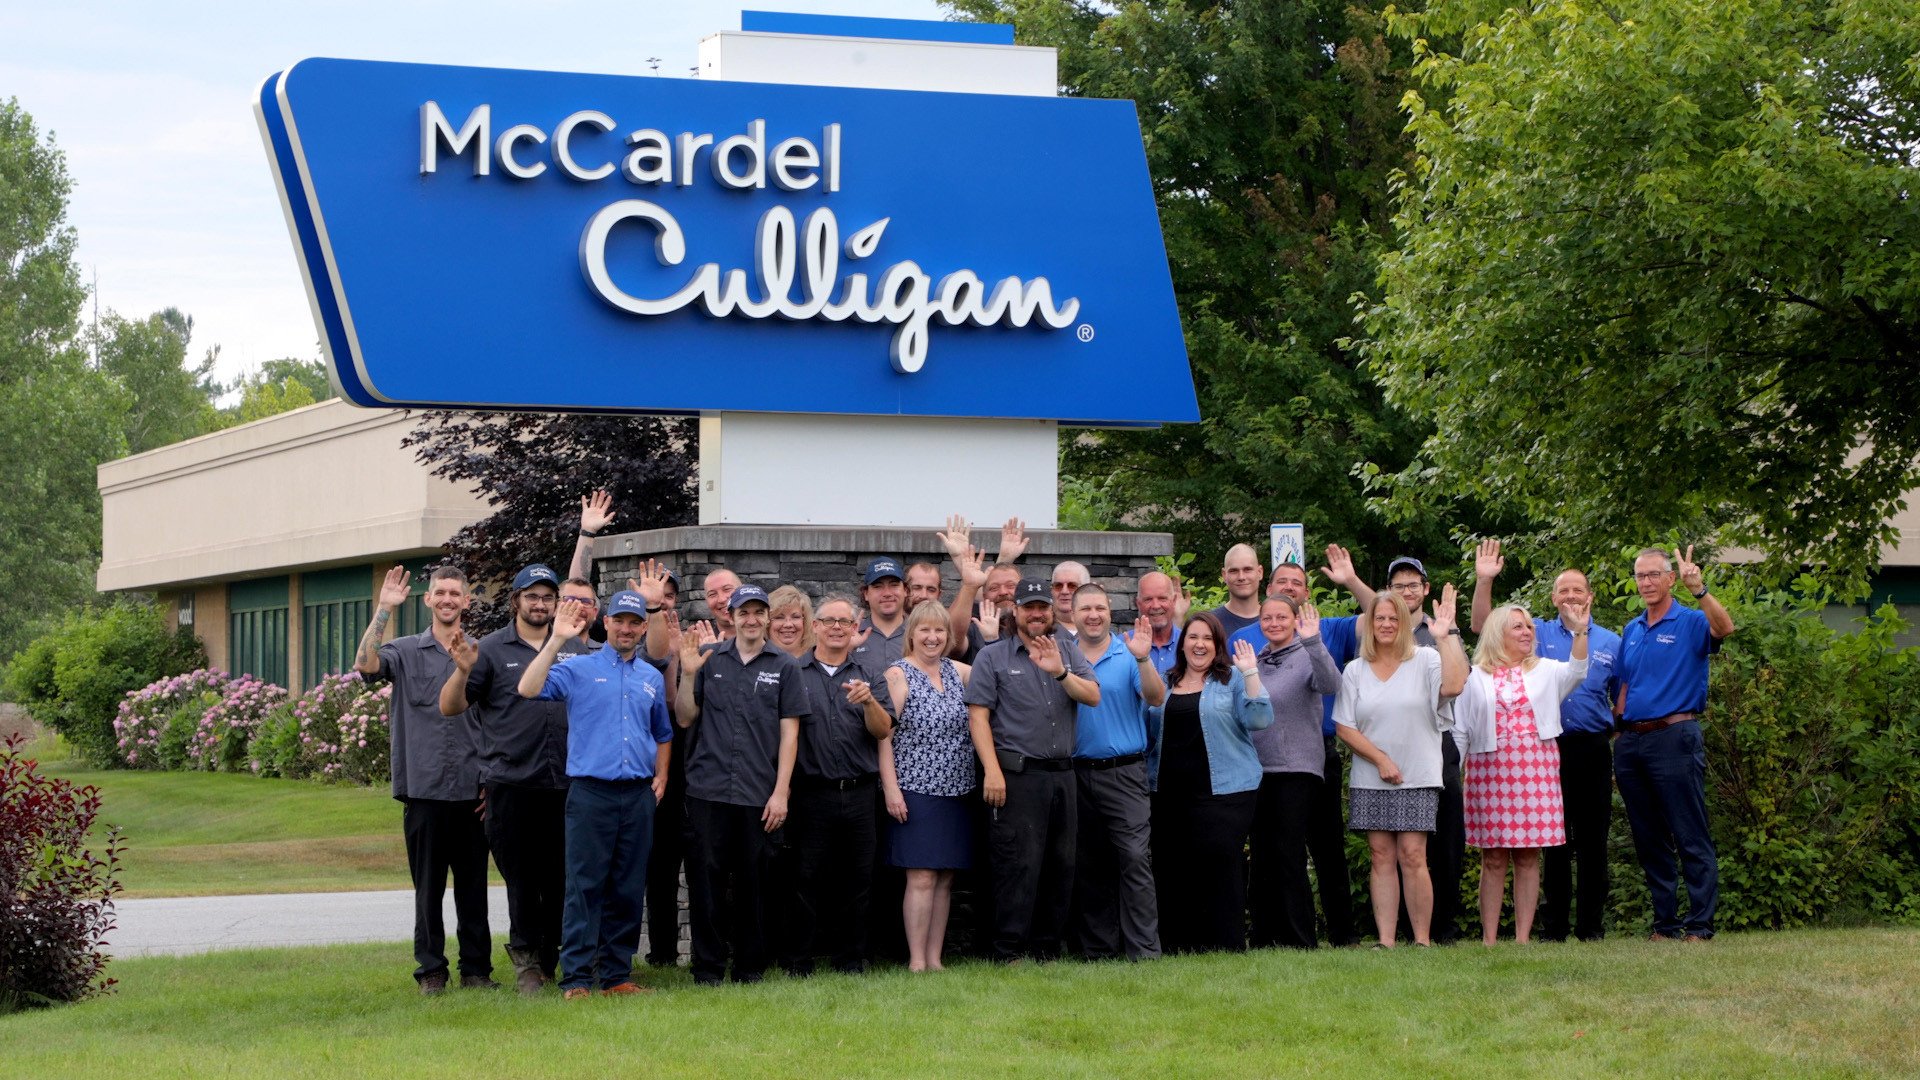 Staff posing for photo outside McCardel Culligan sign